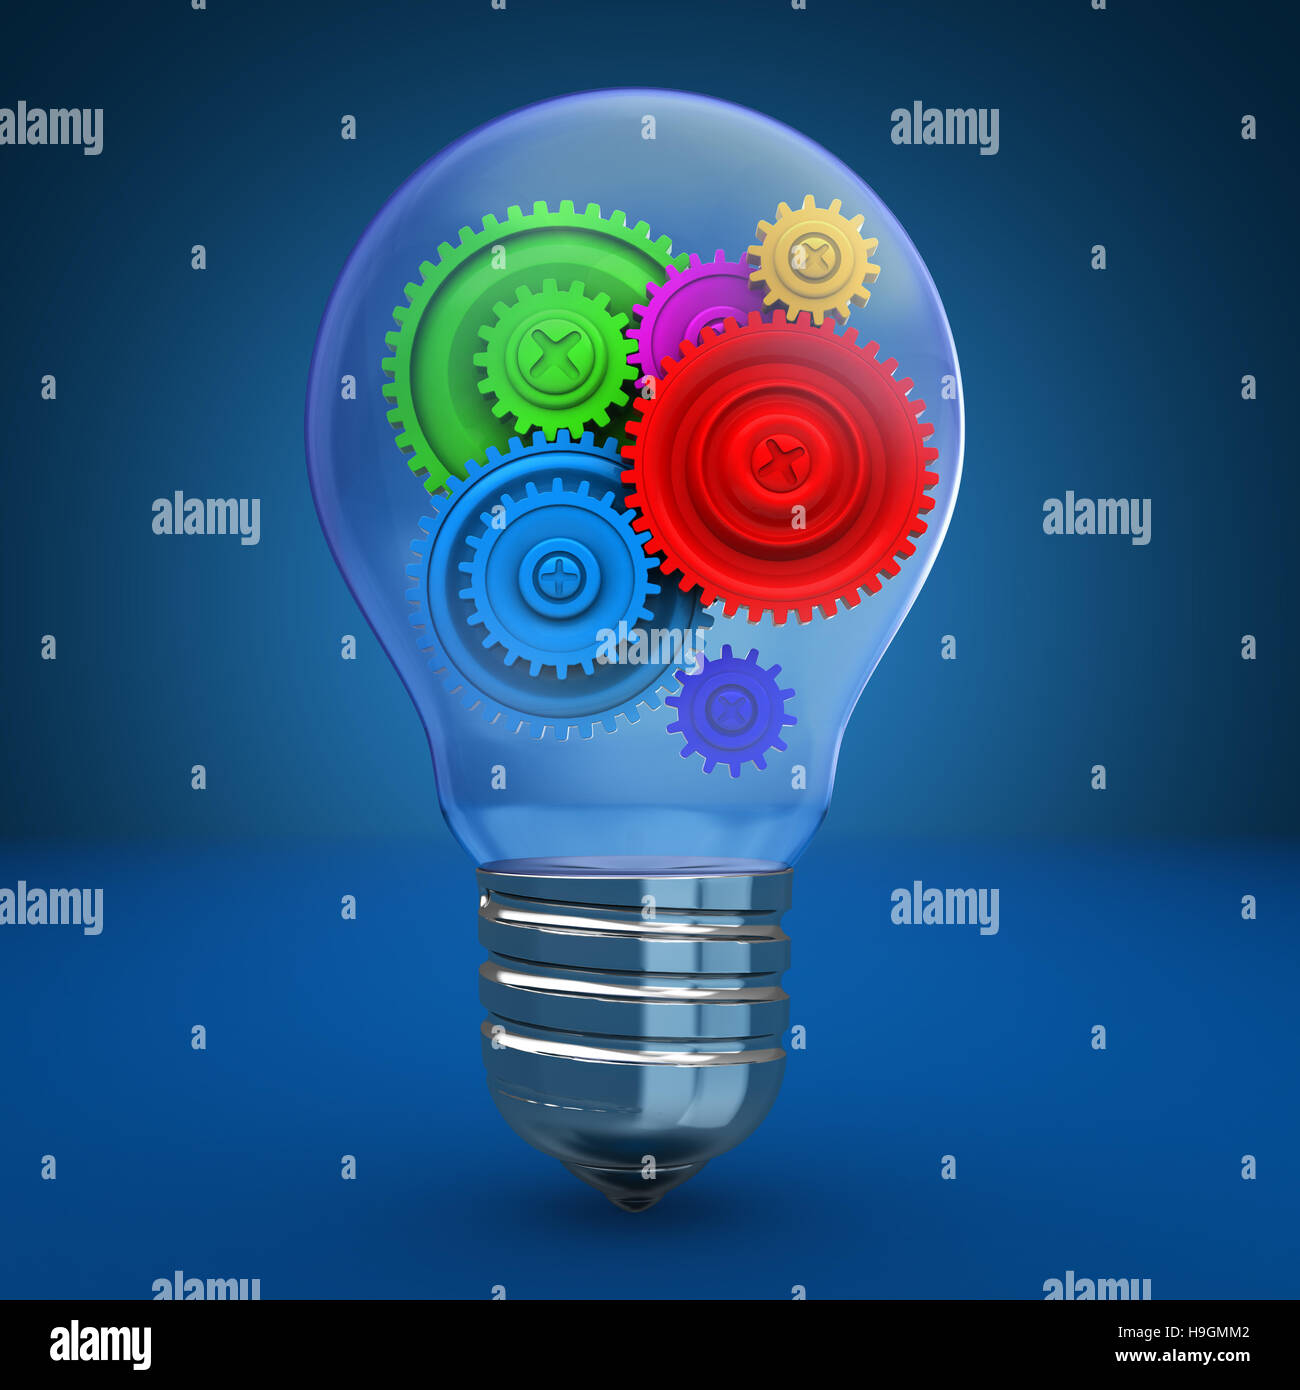 3d illustration of light bulb with colorful gear wheels inside, over blue background Stock Photo